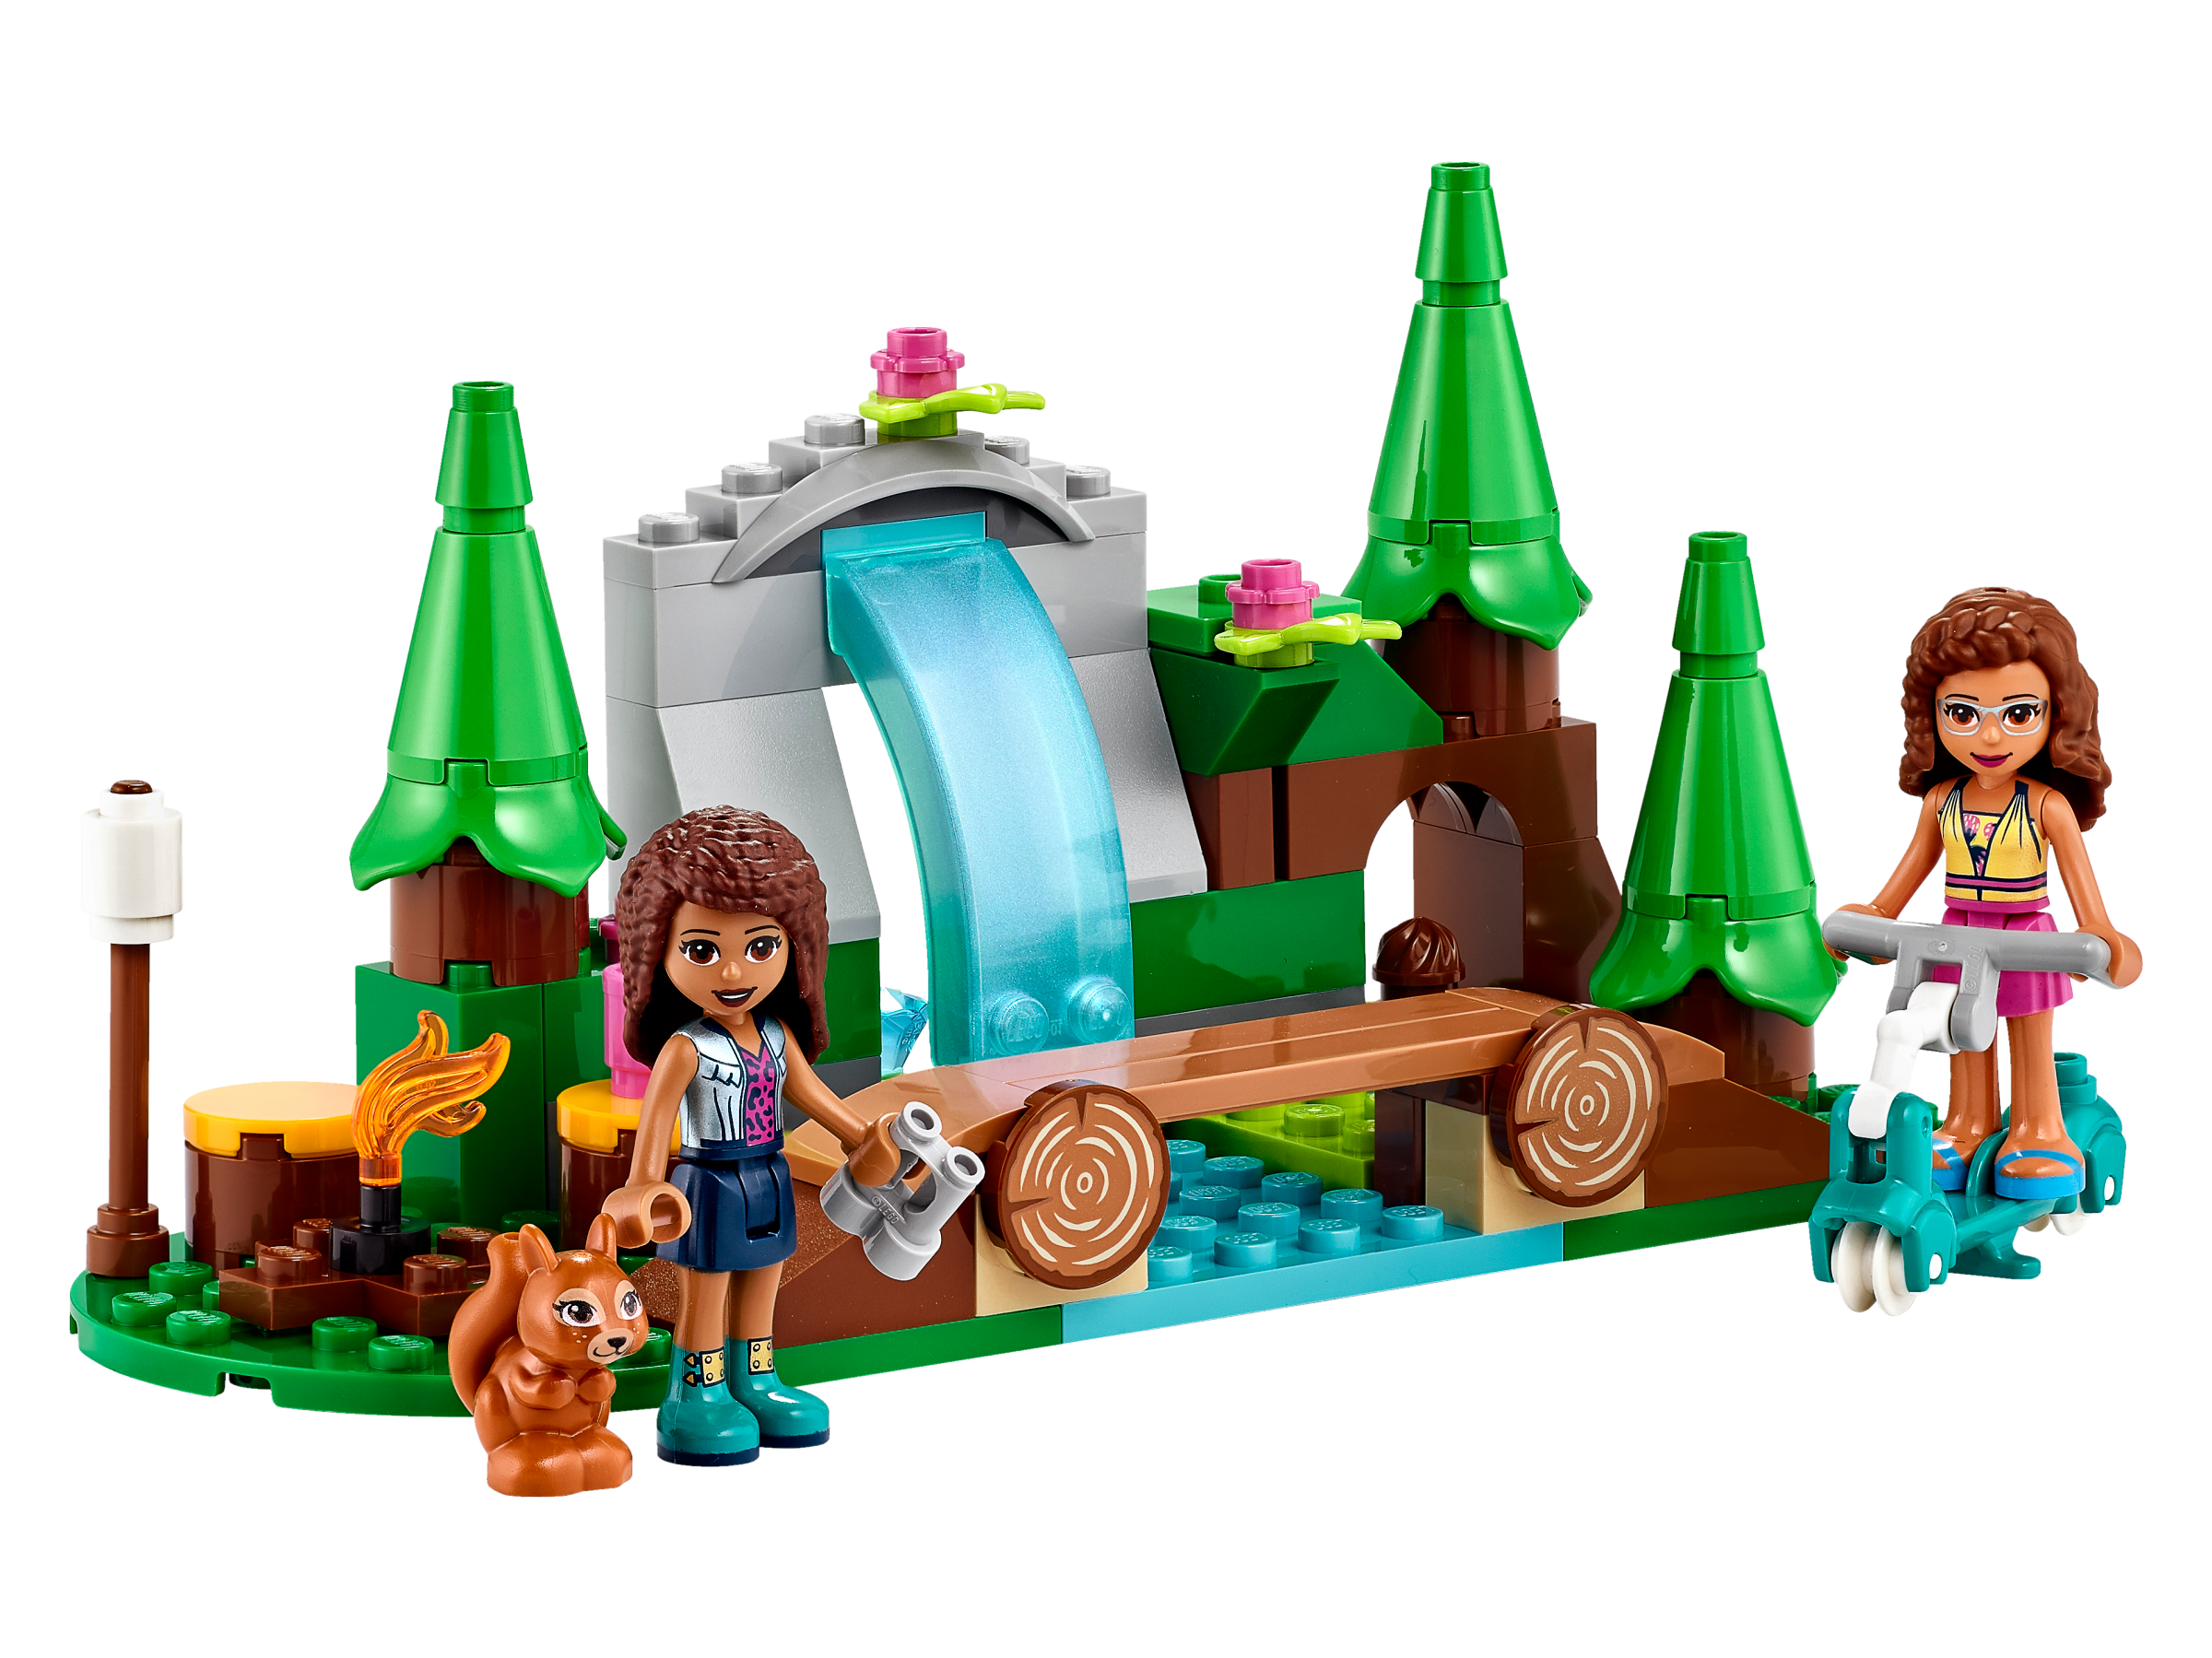 Lego 41677 Forest Waterfall